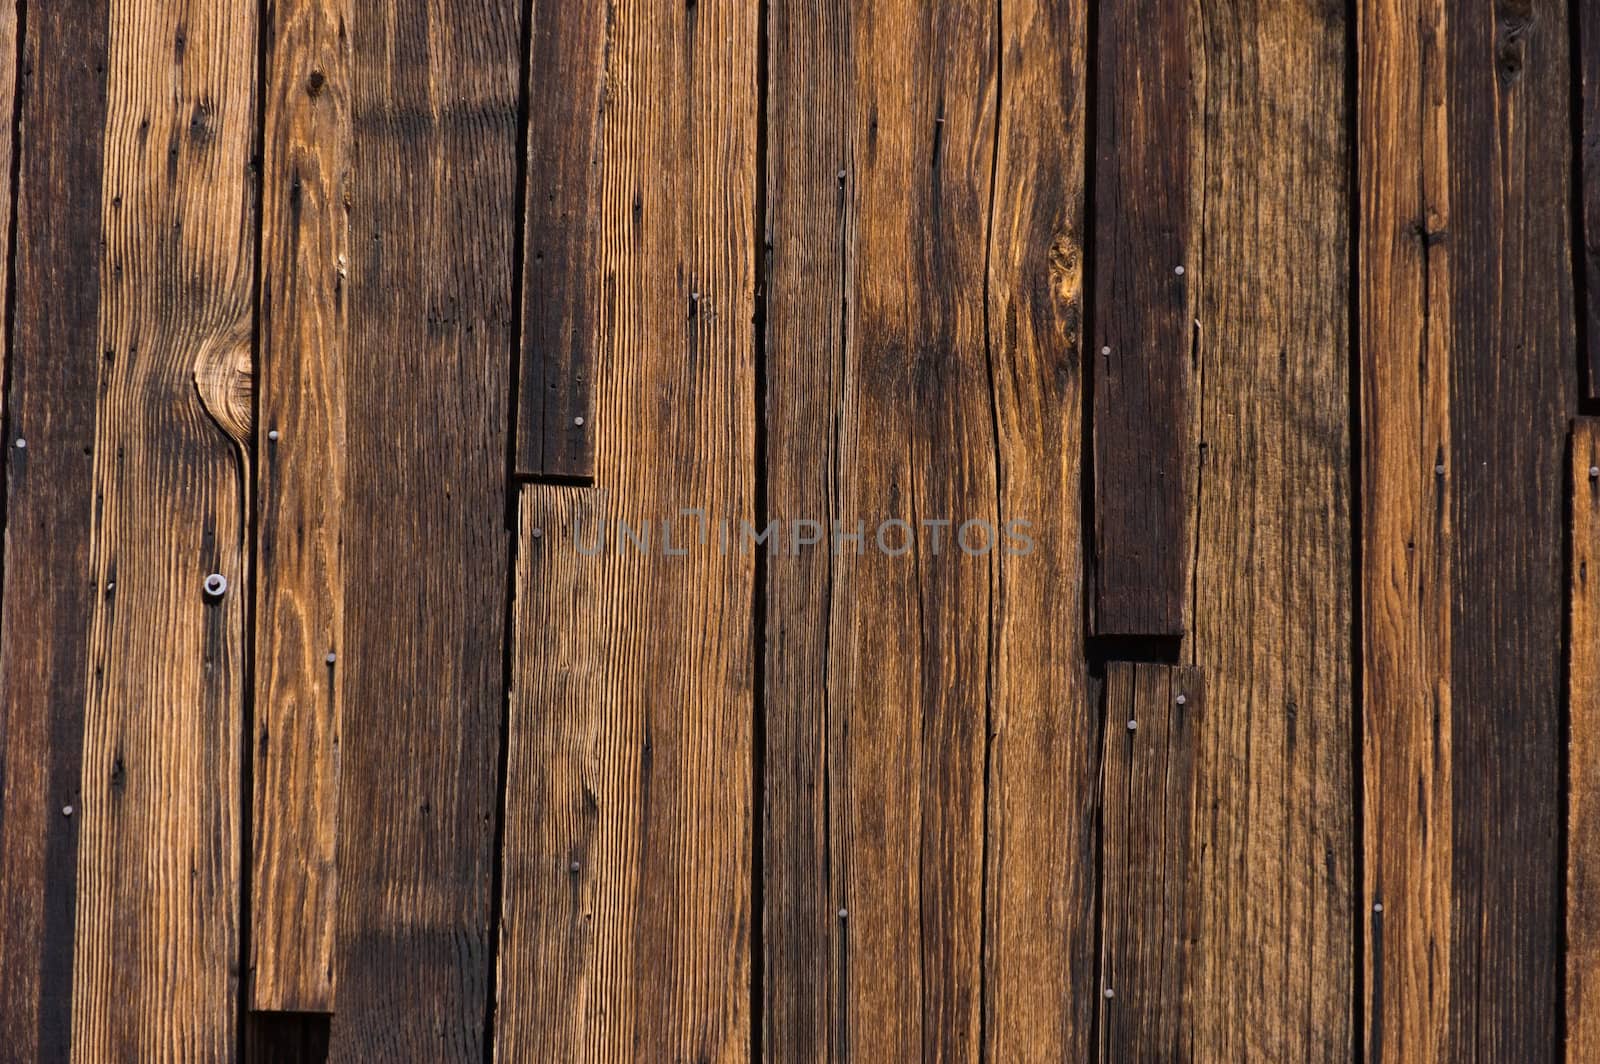 an old wooden floor or wall